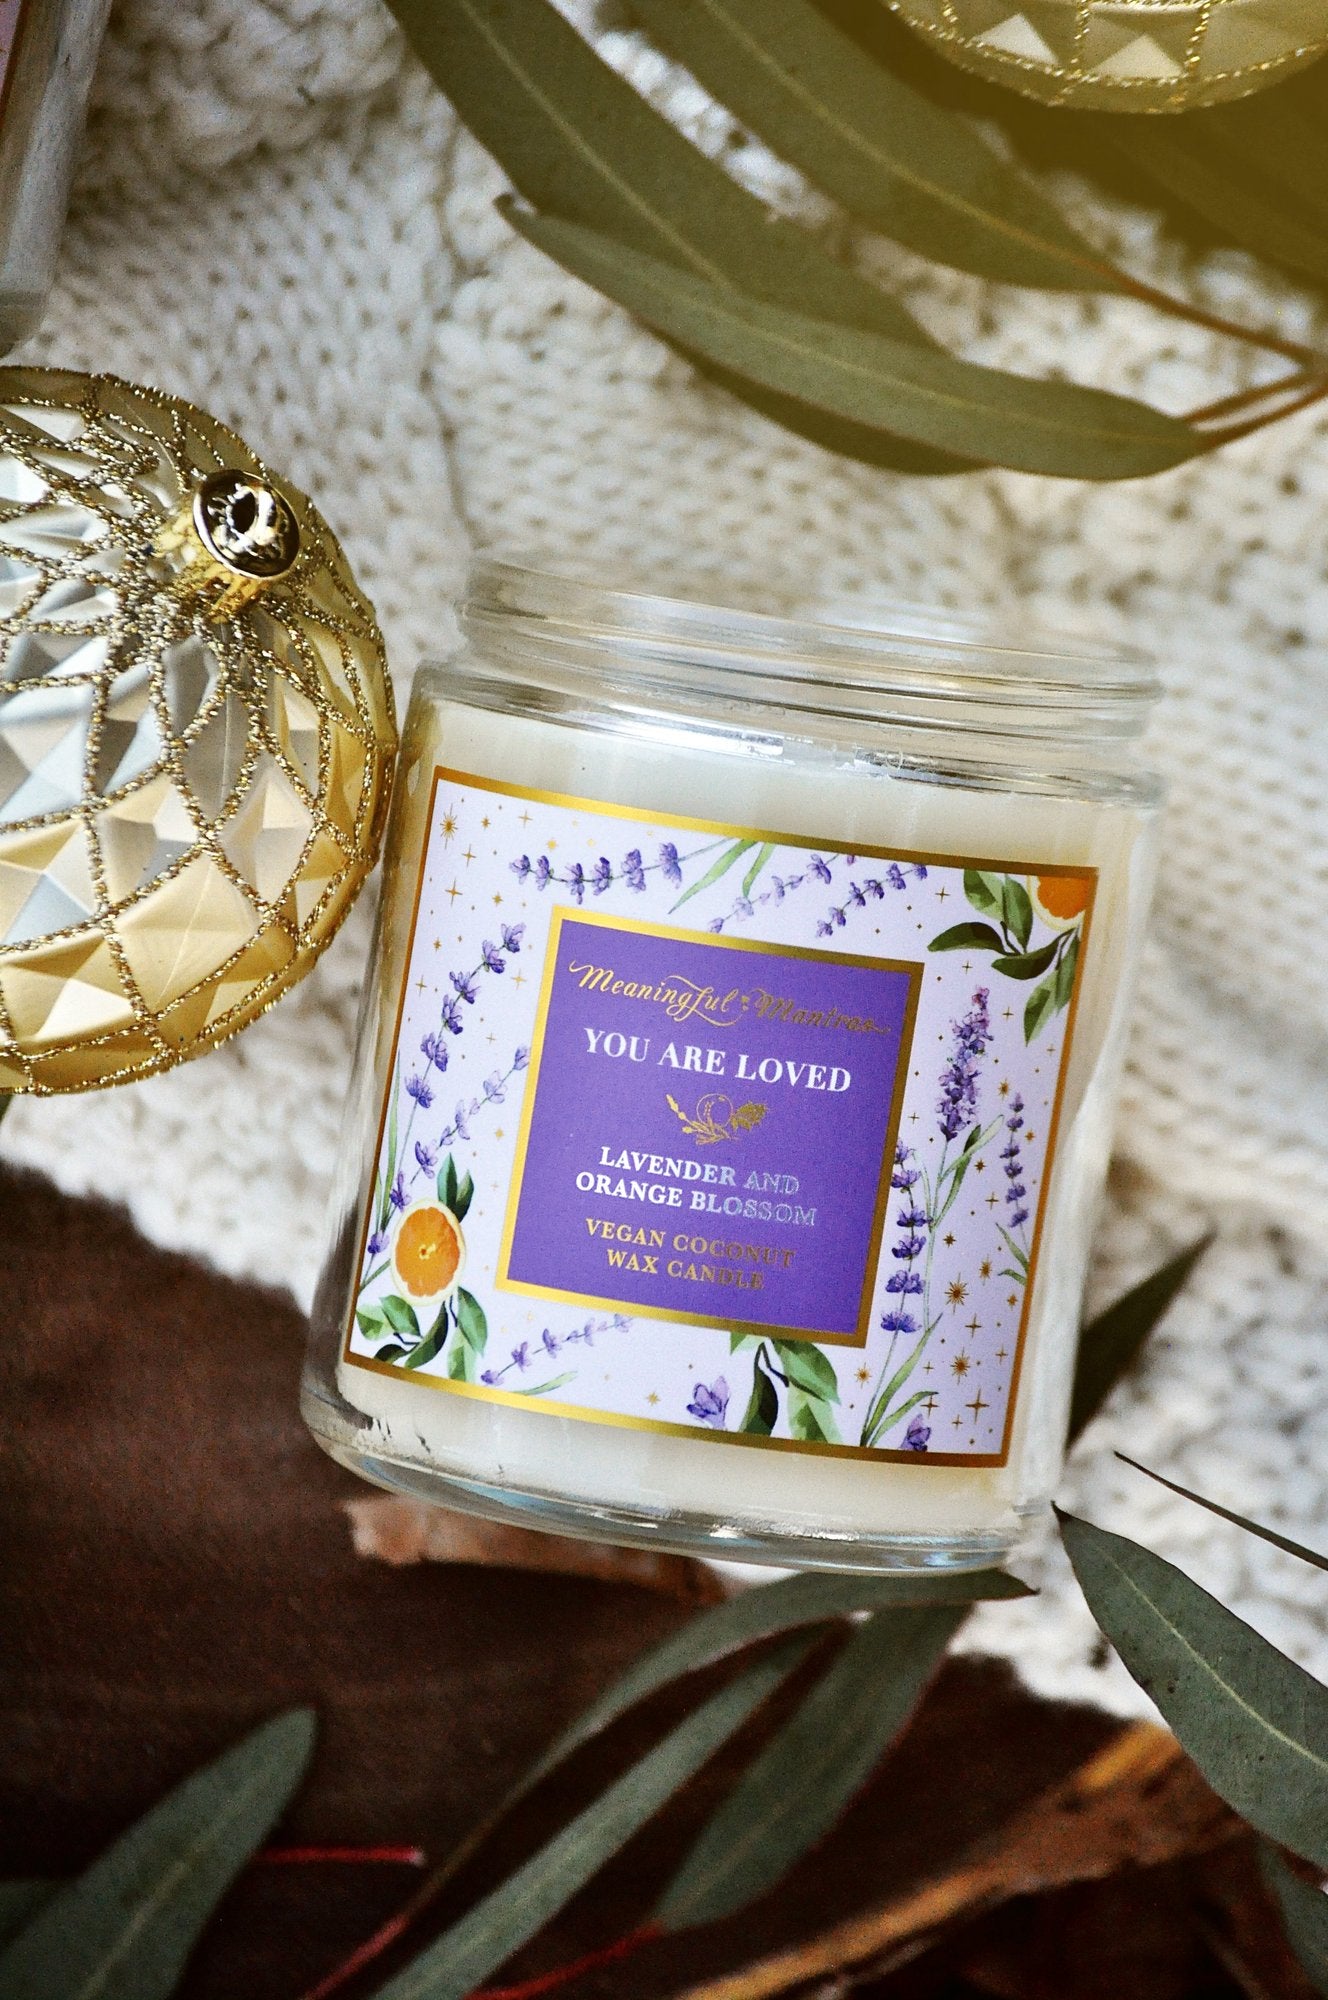 You Are Loved Lavender & Orange Blossom Candle